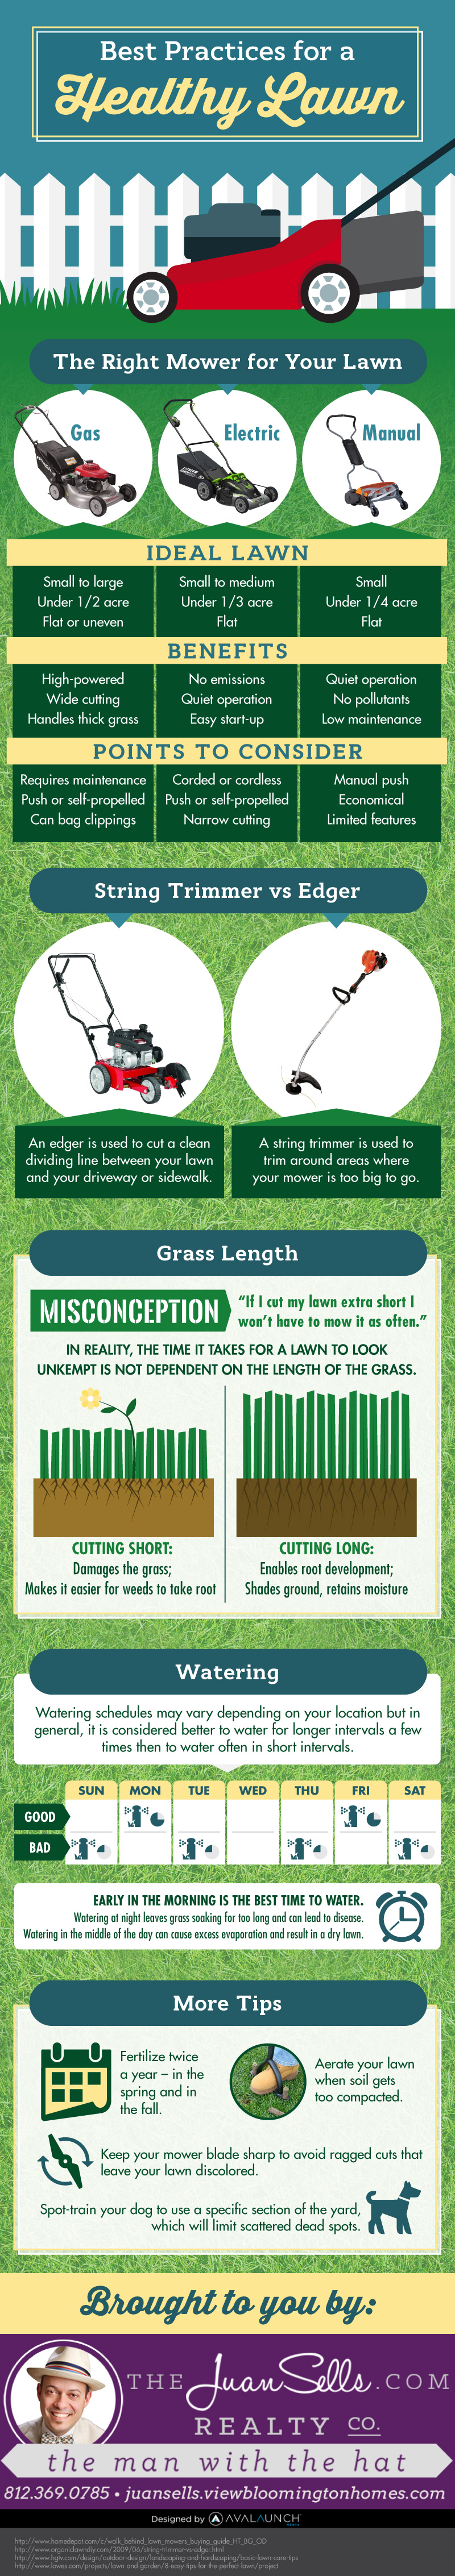 Best practices for a healthy lawn include finding the right mower, not cutting the grass too short, and watering it twice a week.